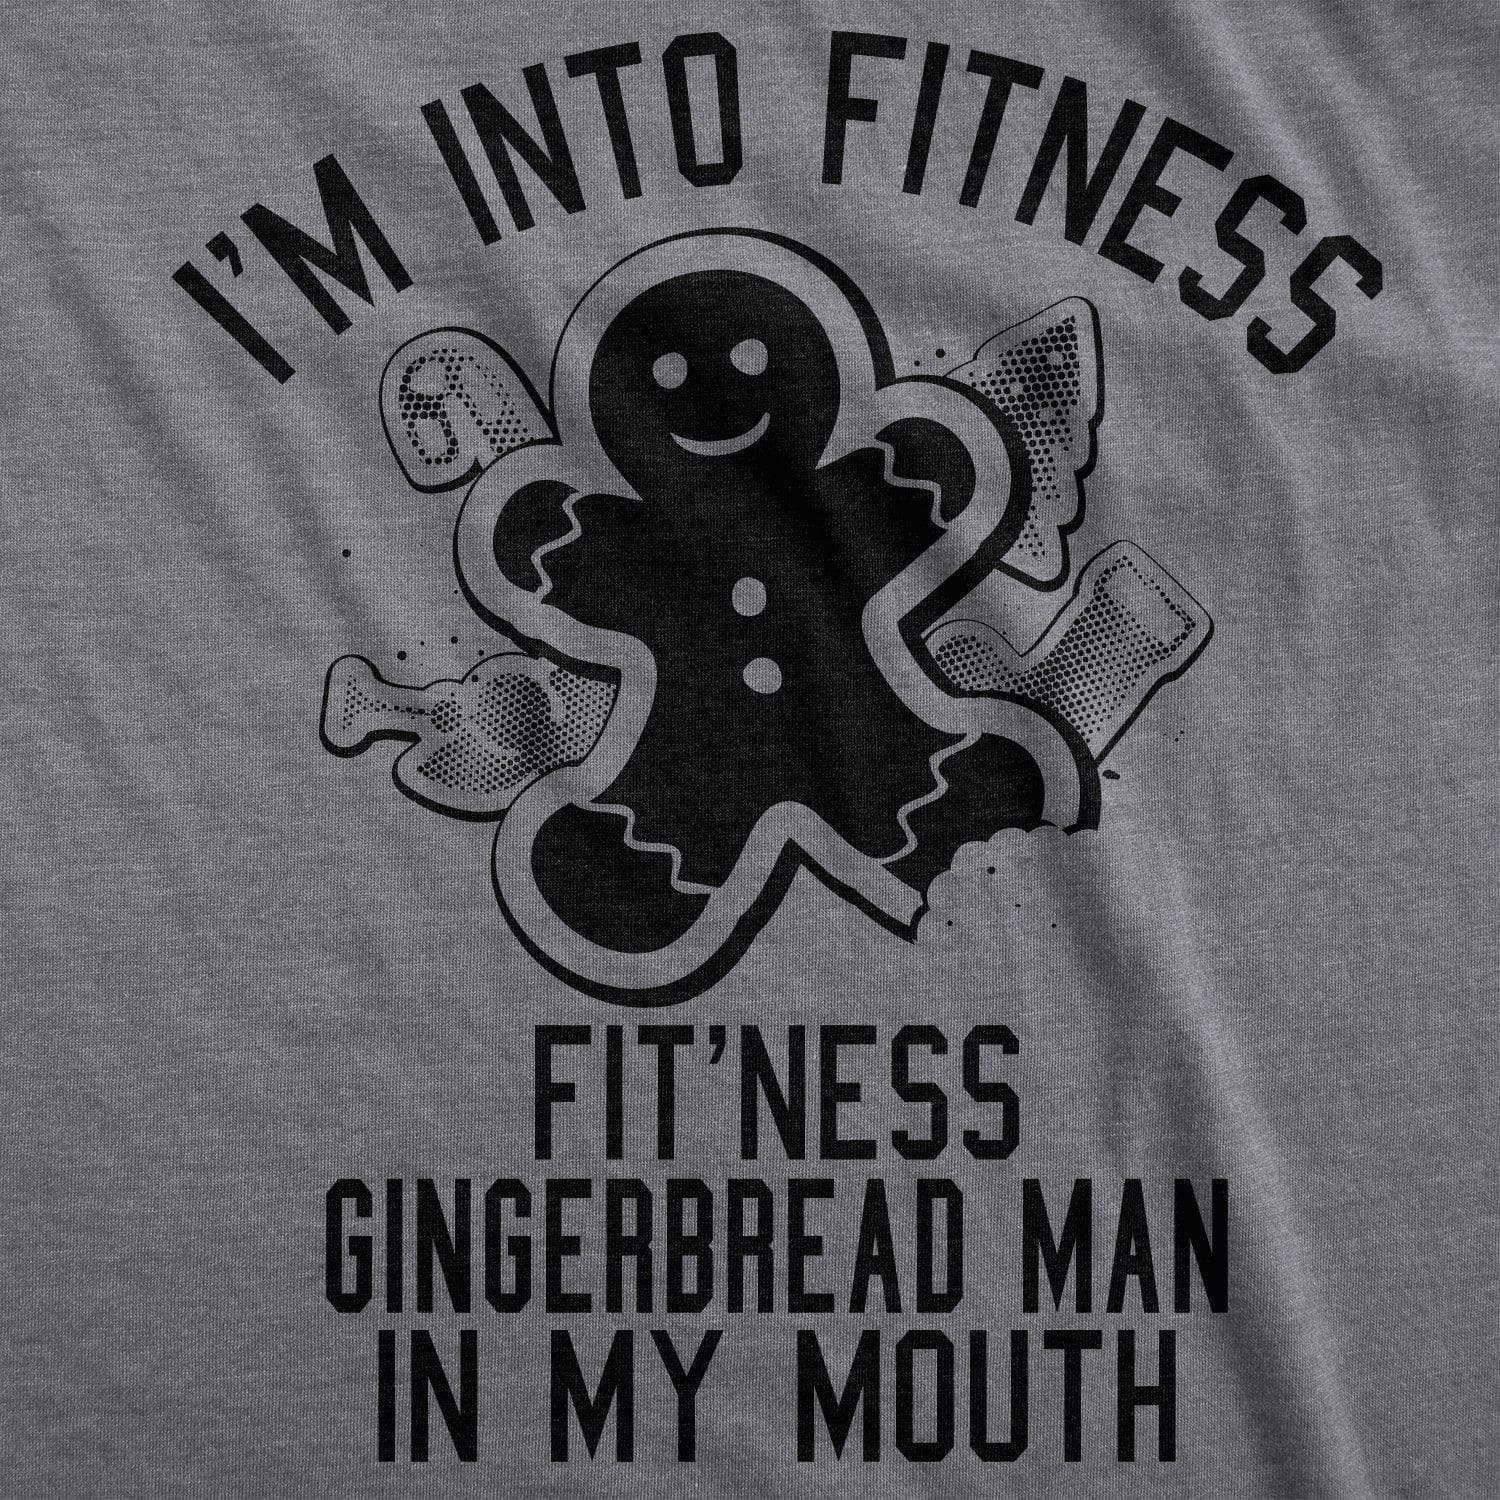 Fitness Gingerbread In My Mouth Women's Tshirt - Crazy Dog T-Shirts